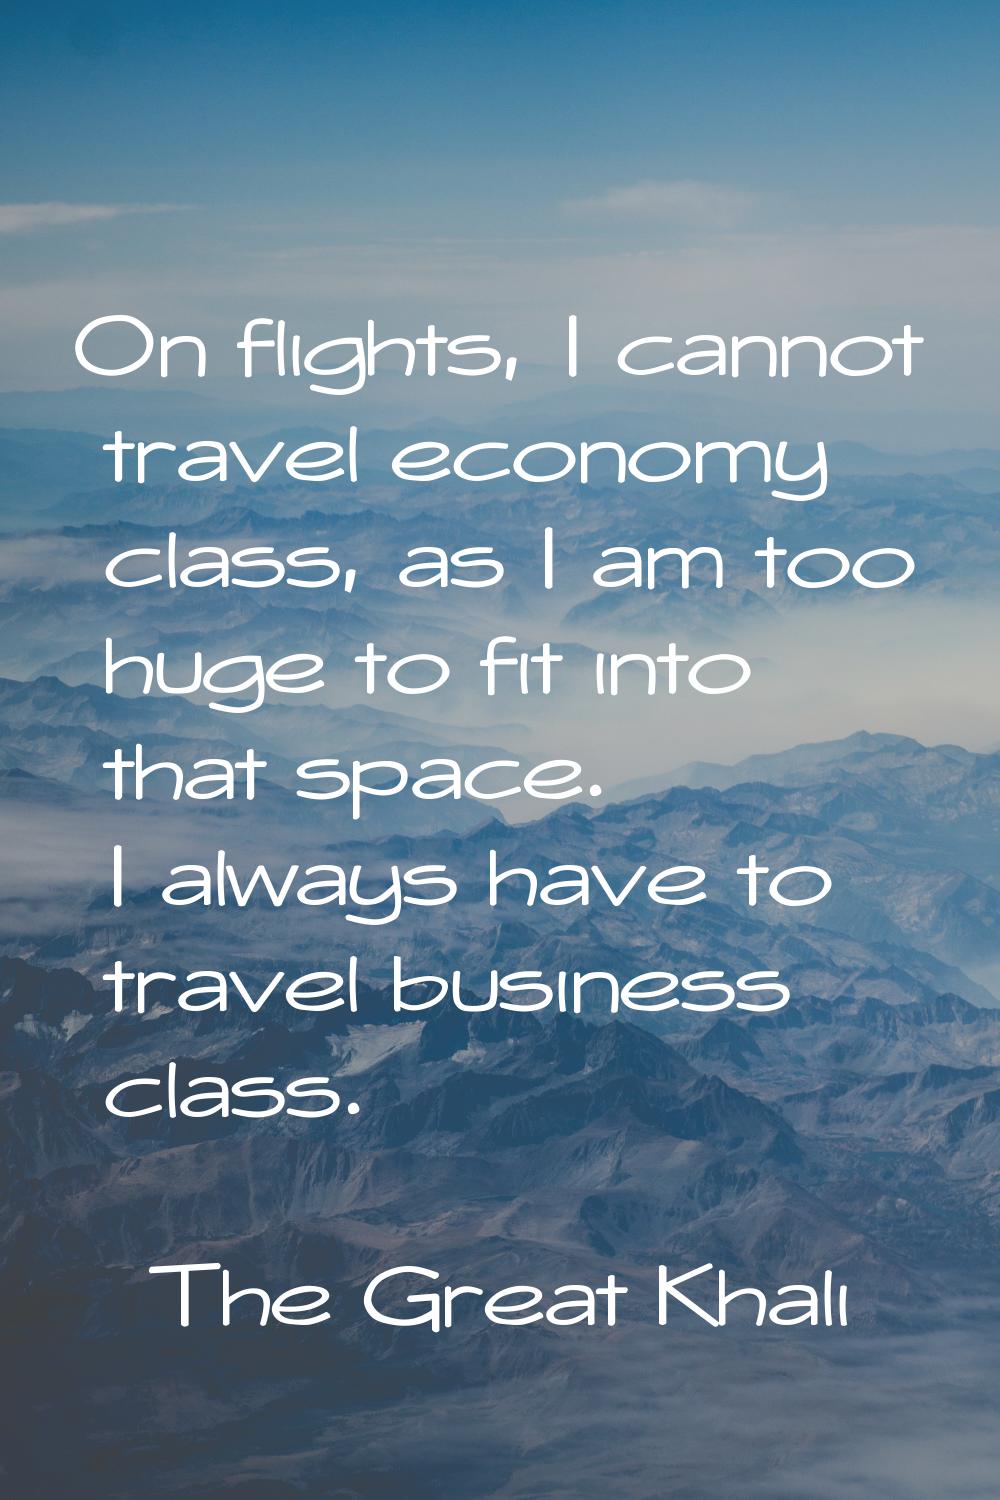 On flights, I cannot travel economy class, as I am too huge to fit into that space. I always have t